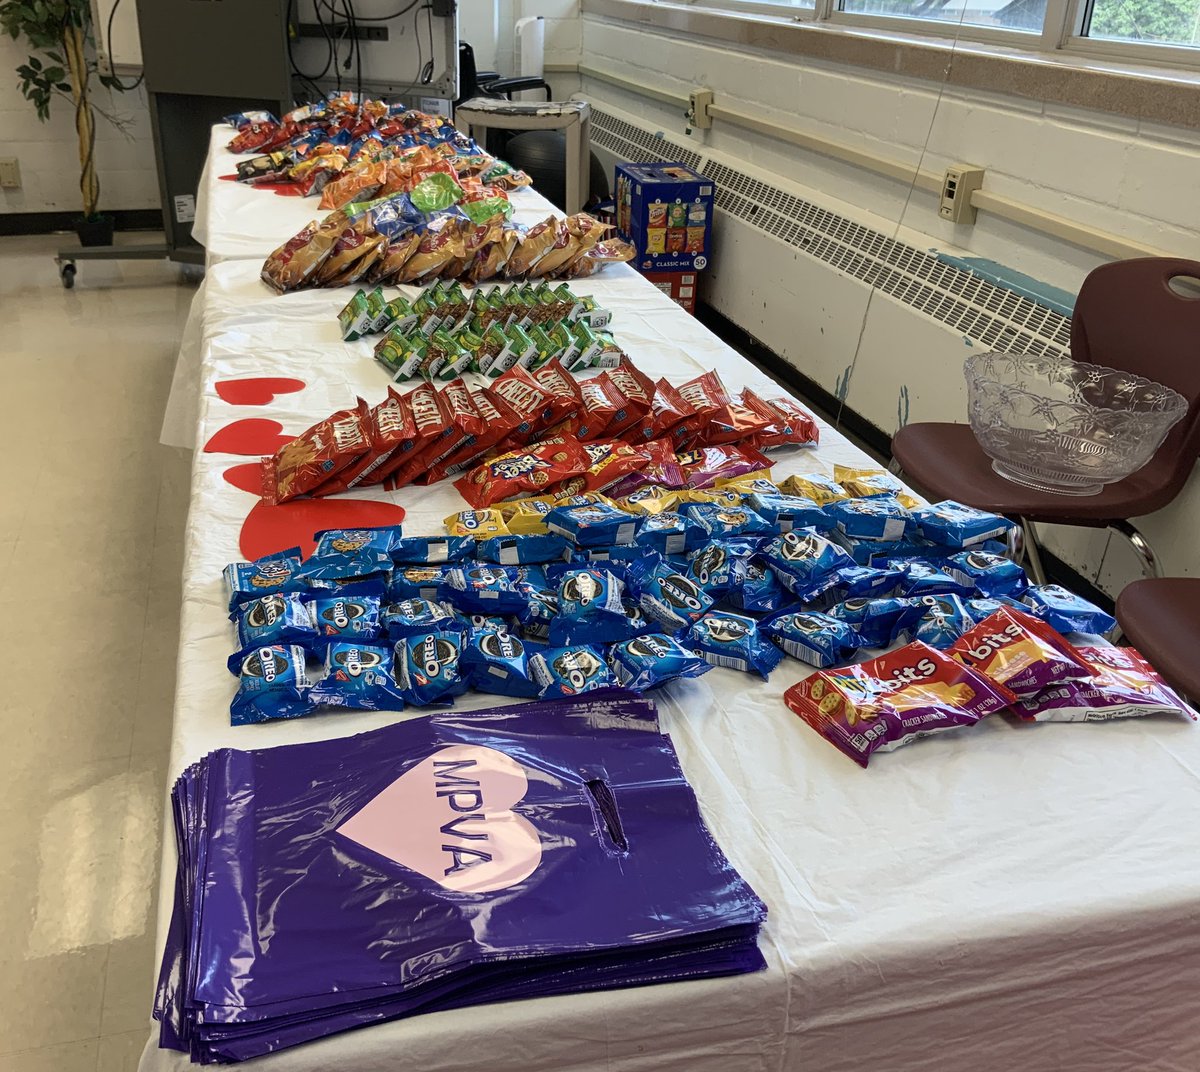 Snack time just got a whole lot sweeter, all thanks to our incredible @MeyerlandMS PTO! 🍭❤️ The love we feel is real, and delicious! 😋 #SnackBarLove #Grateful